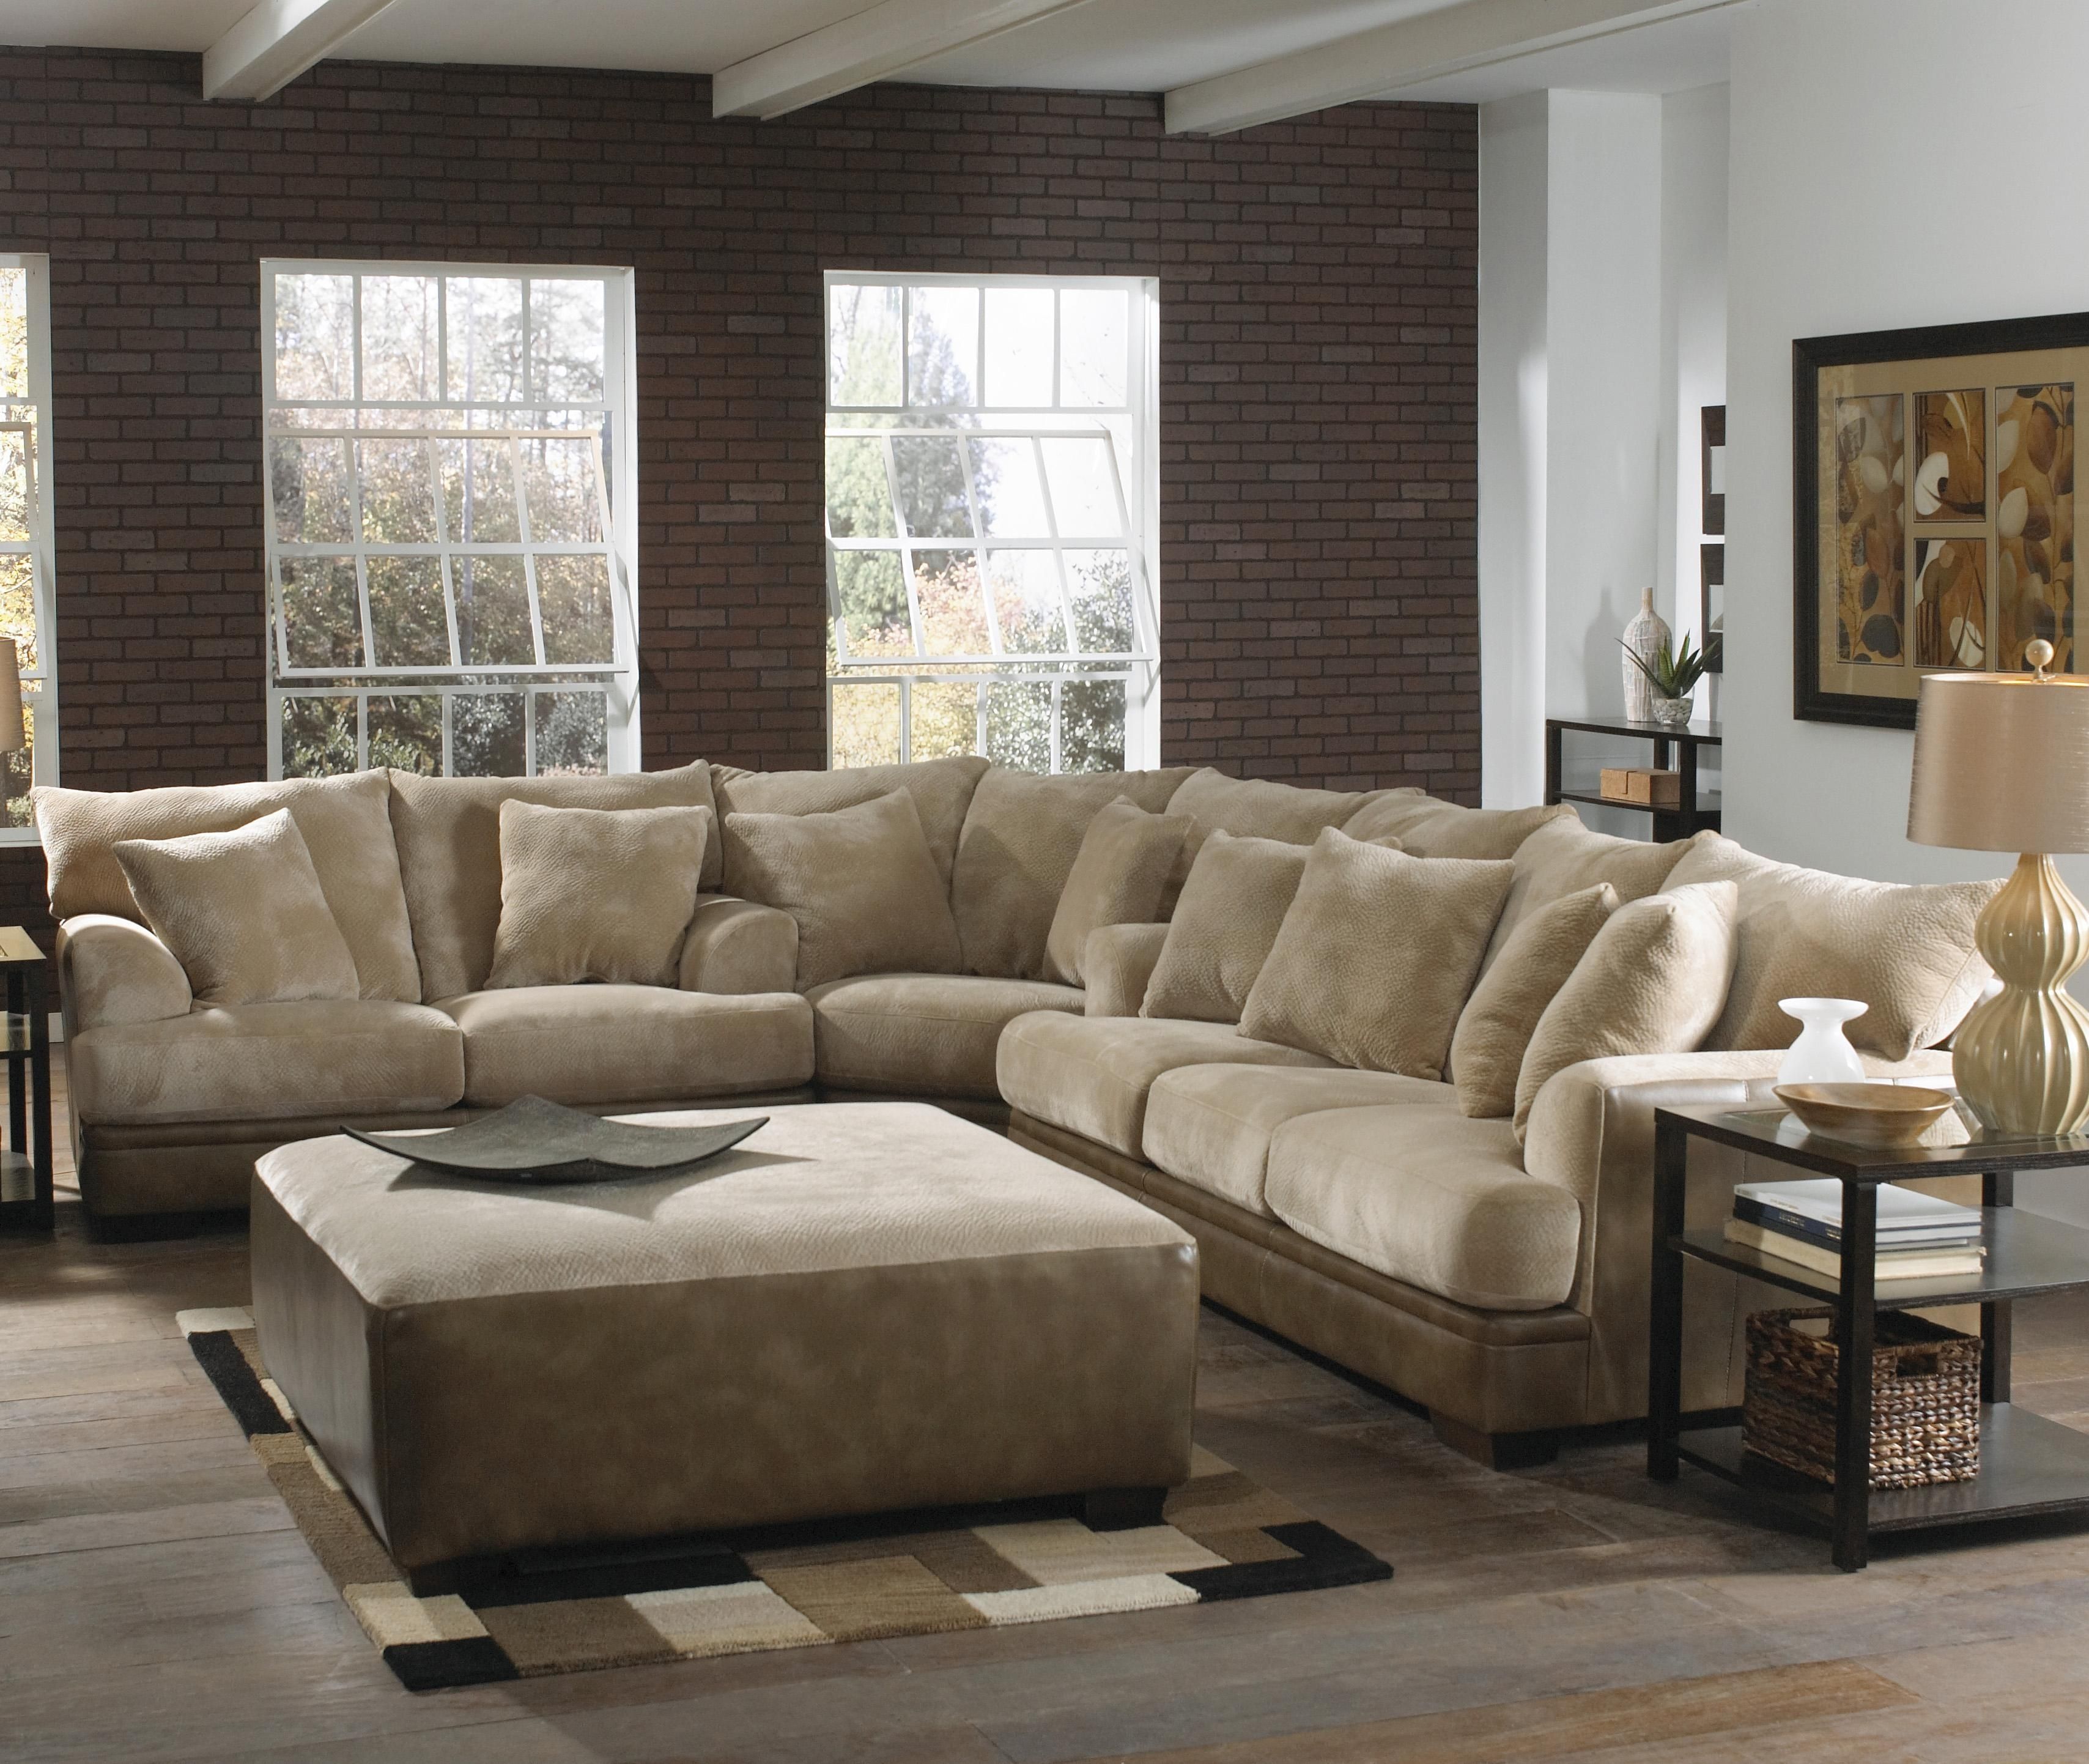 15 Ideas of Extra Large U Shaped Sectionals